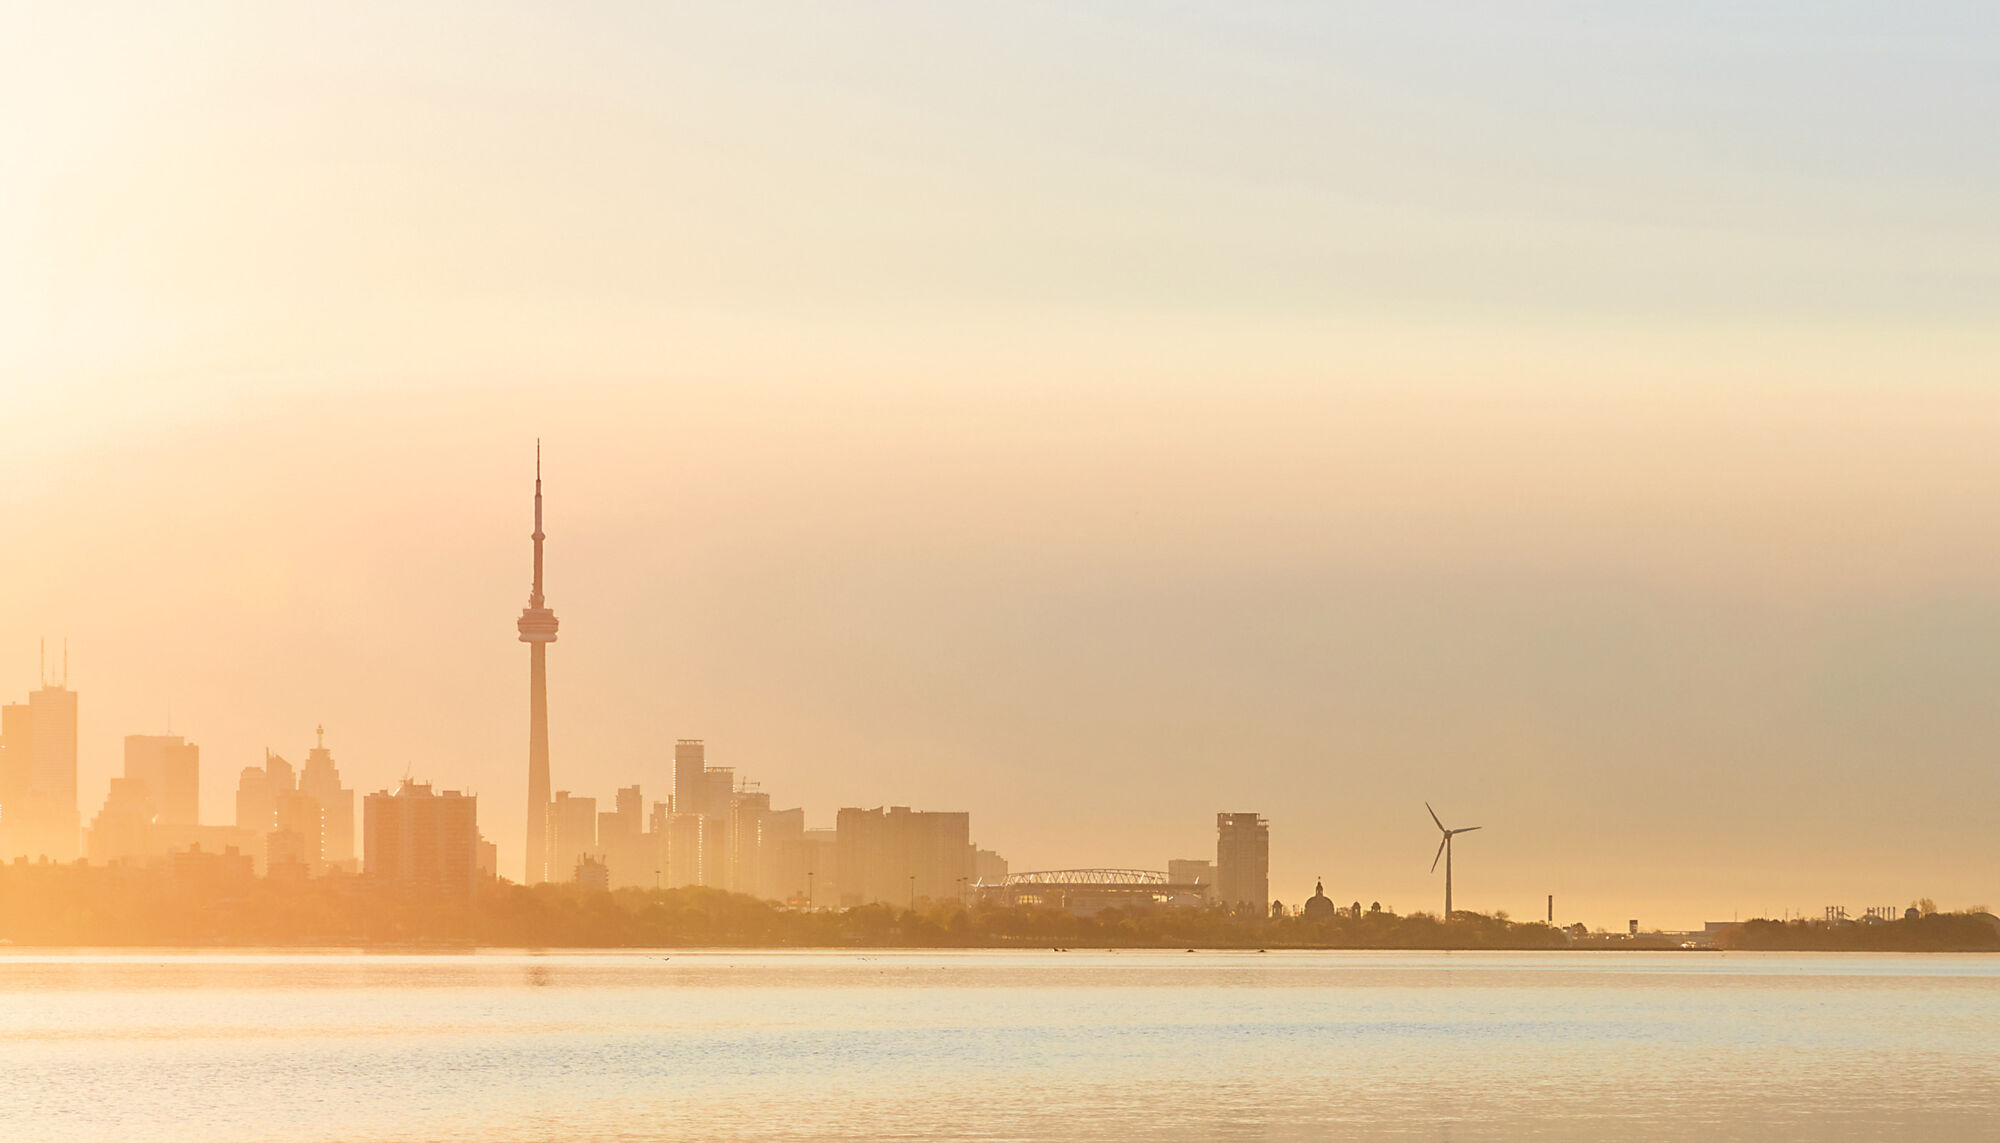 The Toronto skyline right before sunset, producing a golden glow over the skyline and Lake Ontario.